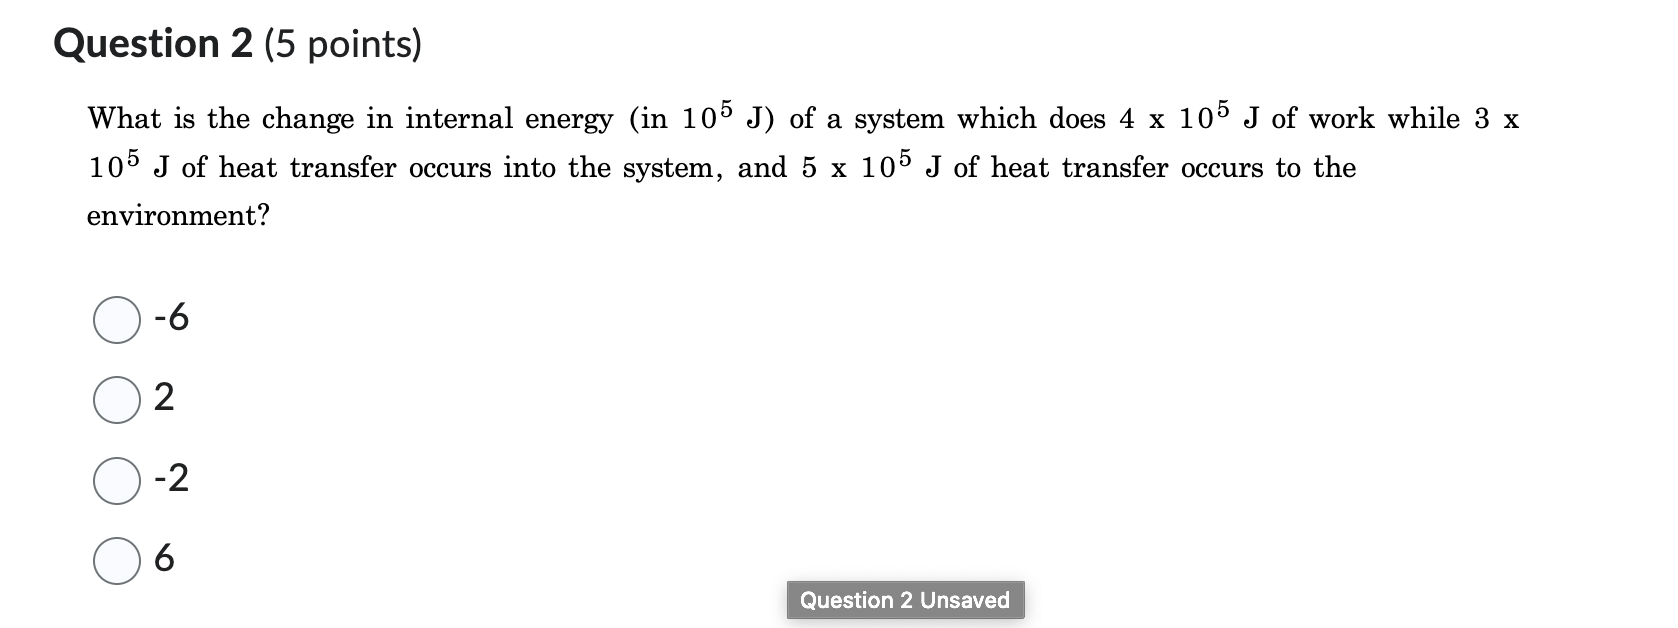 What is the change in internal energy (in J) of a system that